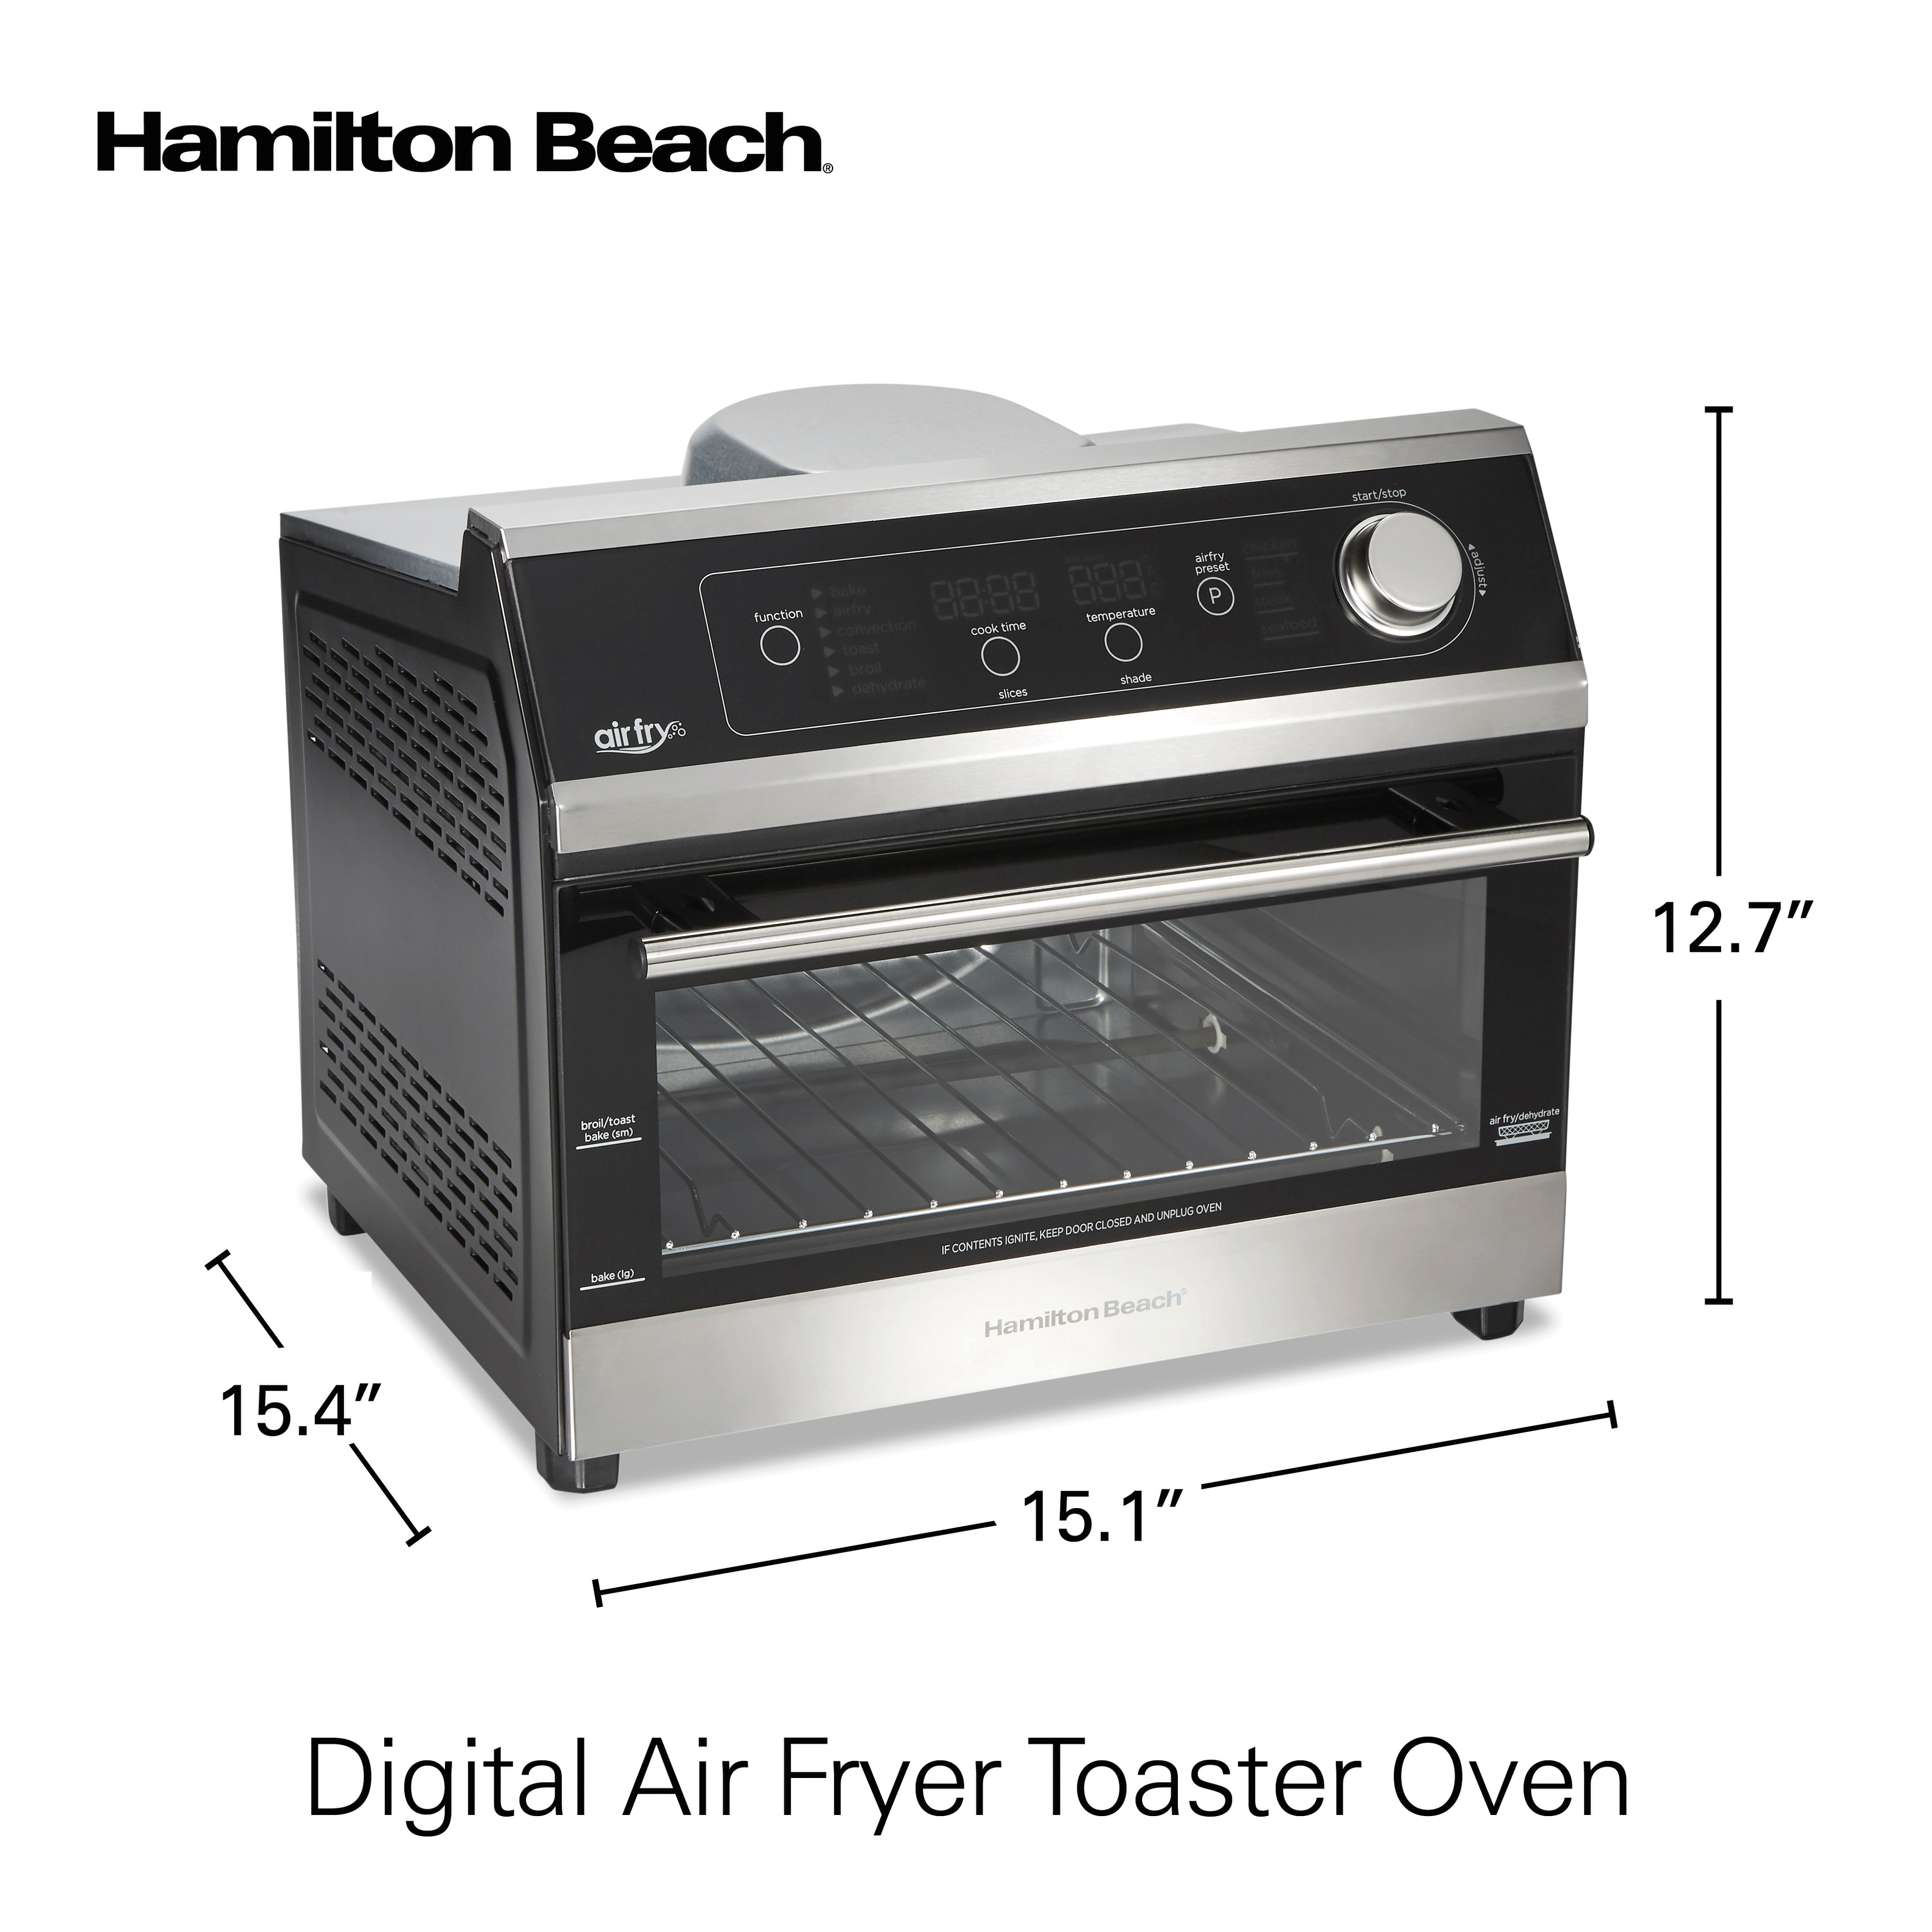 https://ak1.ostkcdn.com/images/products/is/images/direct/c2a153afc288868a847e7773c950dc9655b9c5c2/Hamilton-Beach-6-Slice-Digital-Air-Fryer-Toaster-Oven.jpg